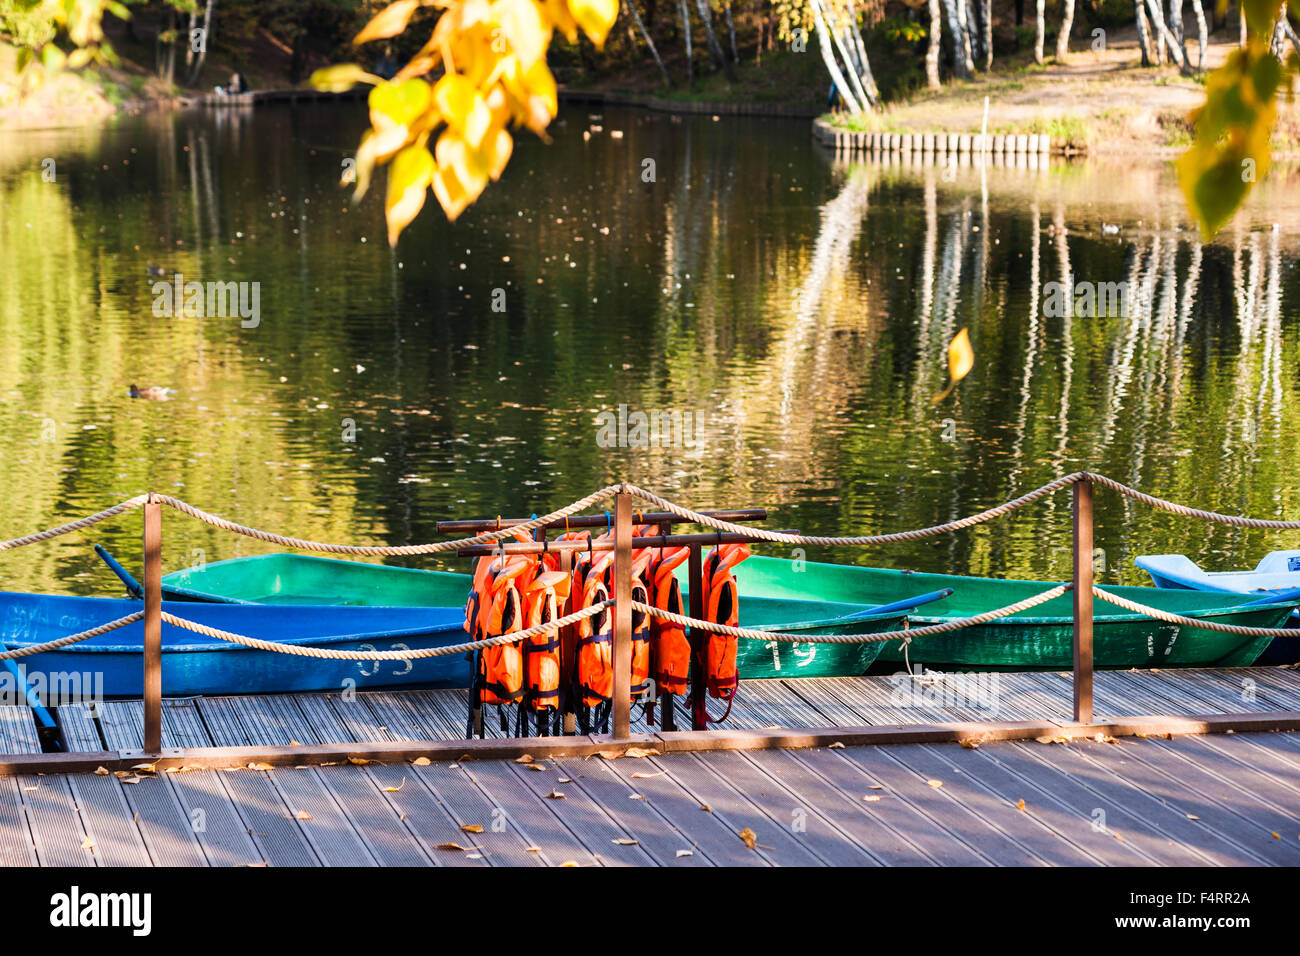 Landing stage and a row of rental boats in autumn. Life-jackets hangs from a rail. Yellow leaf in the air. Nobody around. Stock Photo